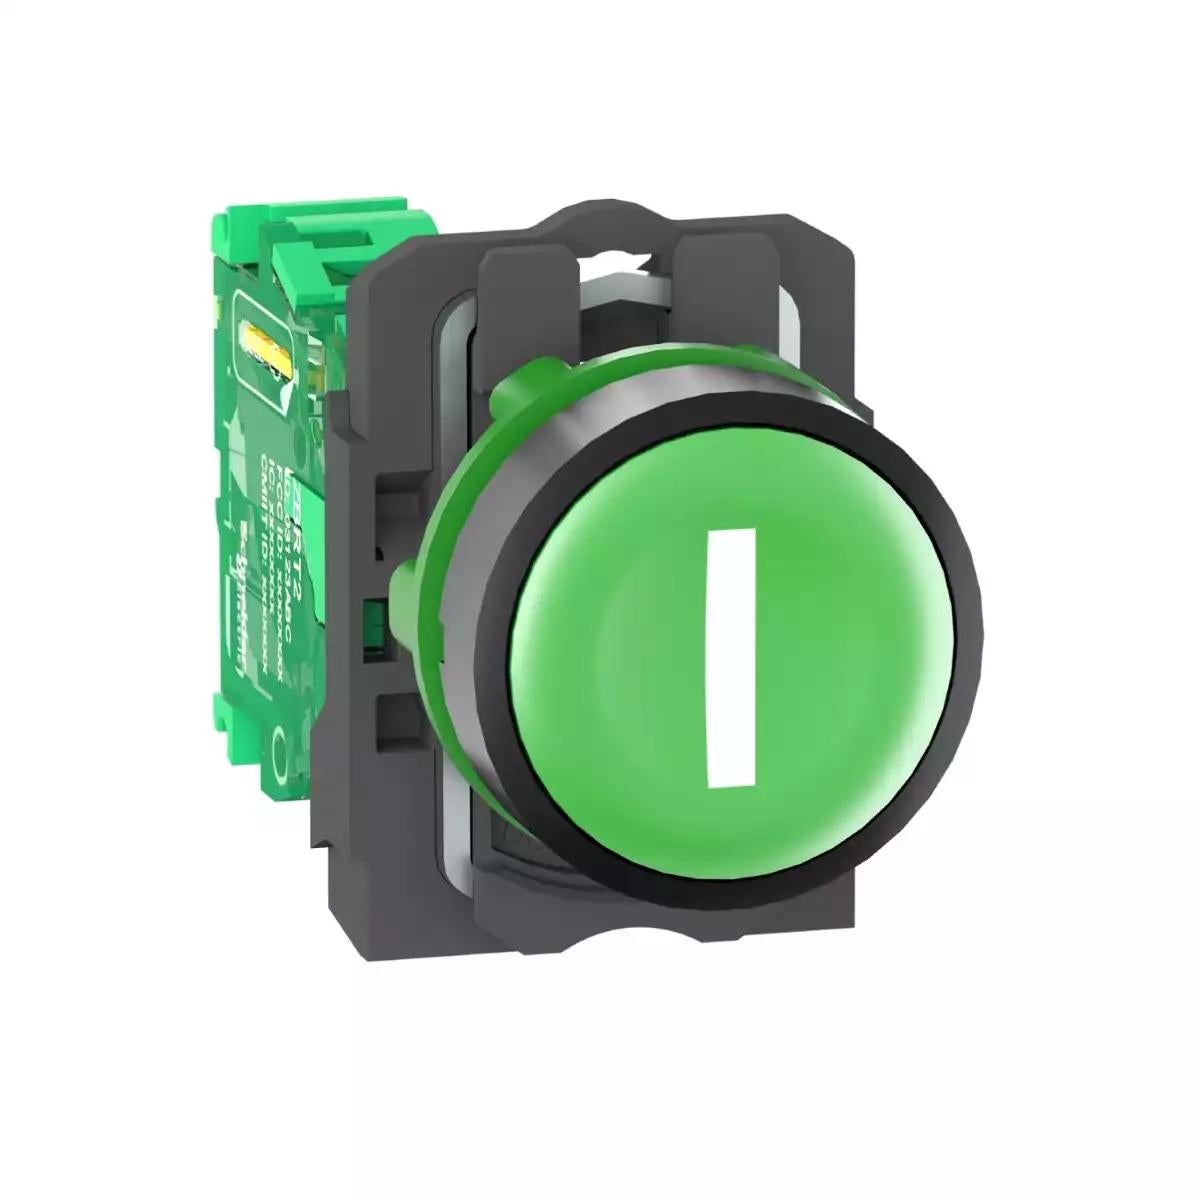 Wireless and batteryless transmitter, Harmony XB5R, push button, plastic, green, 22mm, spring return, marked I